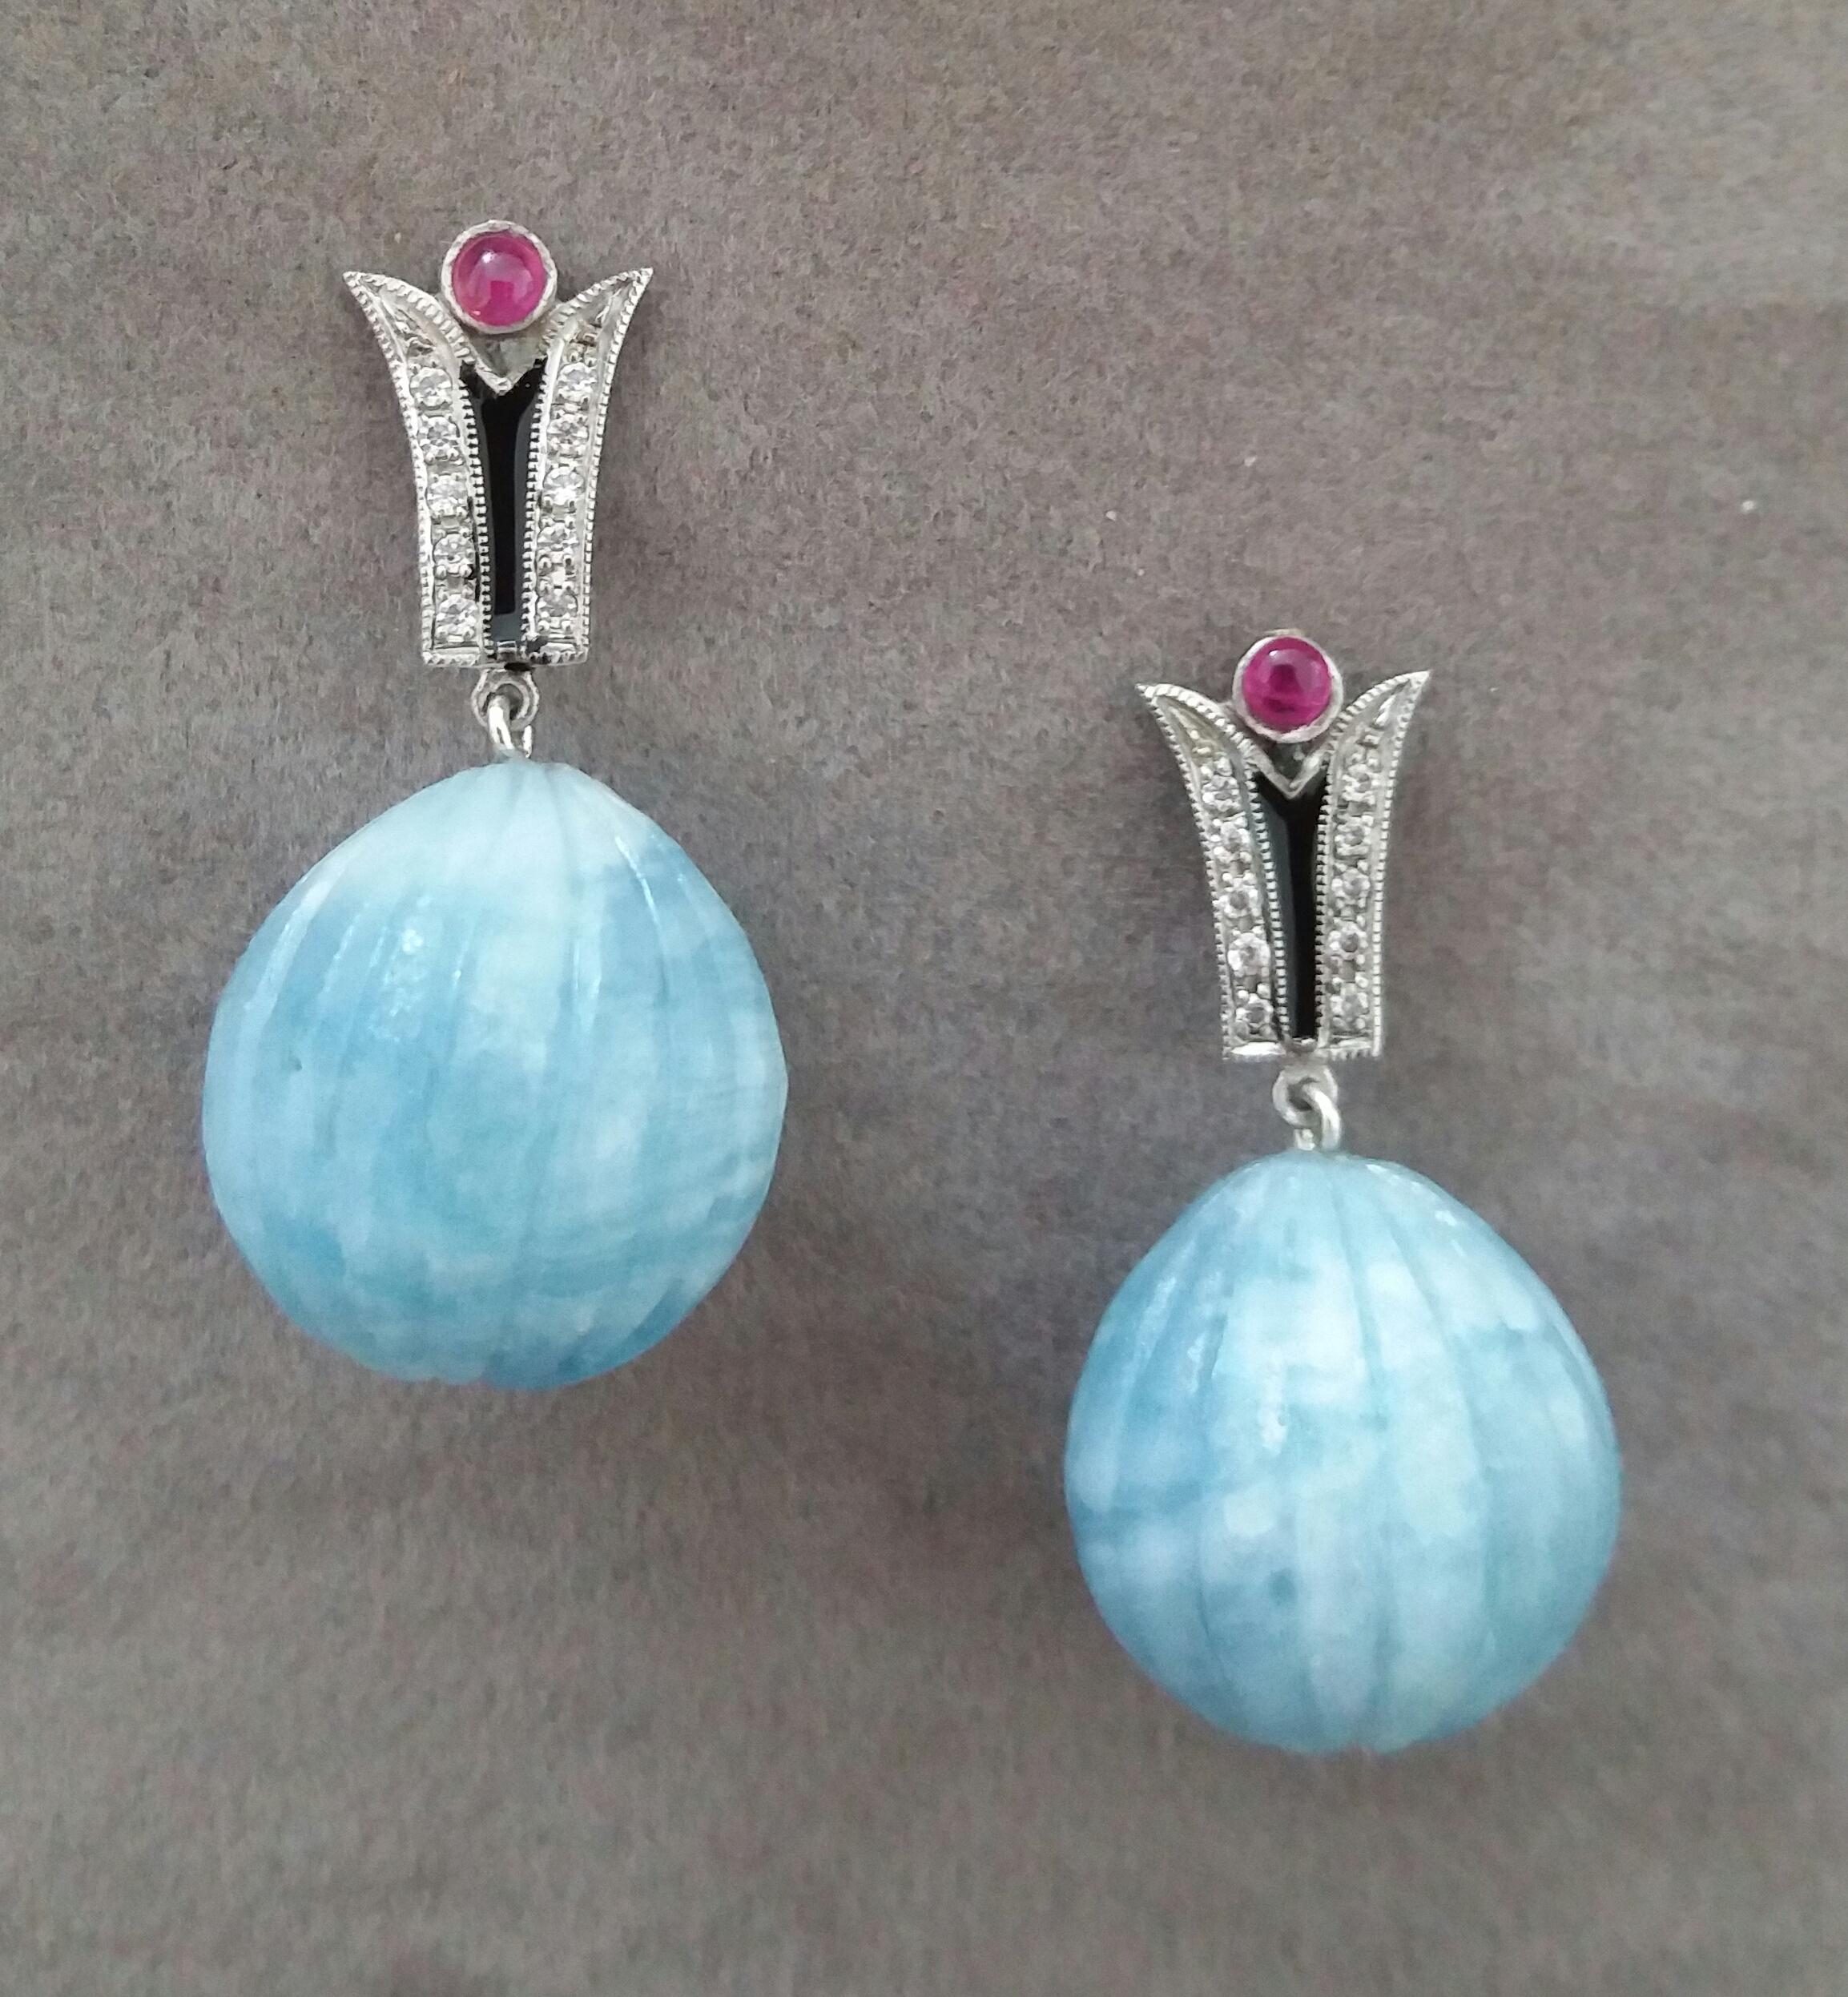 In these classic Art Deco Style earrings the tops are 2 elements  in 14 kt. white gold, 20 round full cut diamonds,black enamel and small round Ruby cabochons ,in the lower parts we have 2  Aquamarine  Carved Drops  measuring 15 x 15 mm and weighing